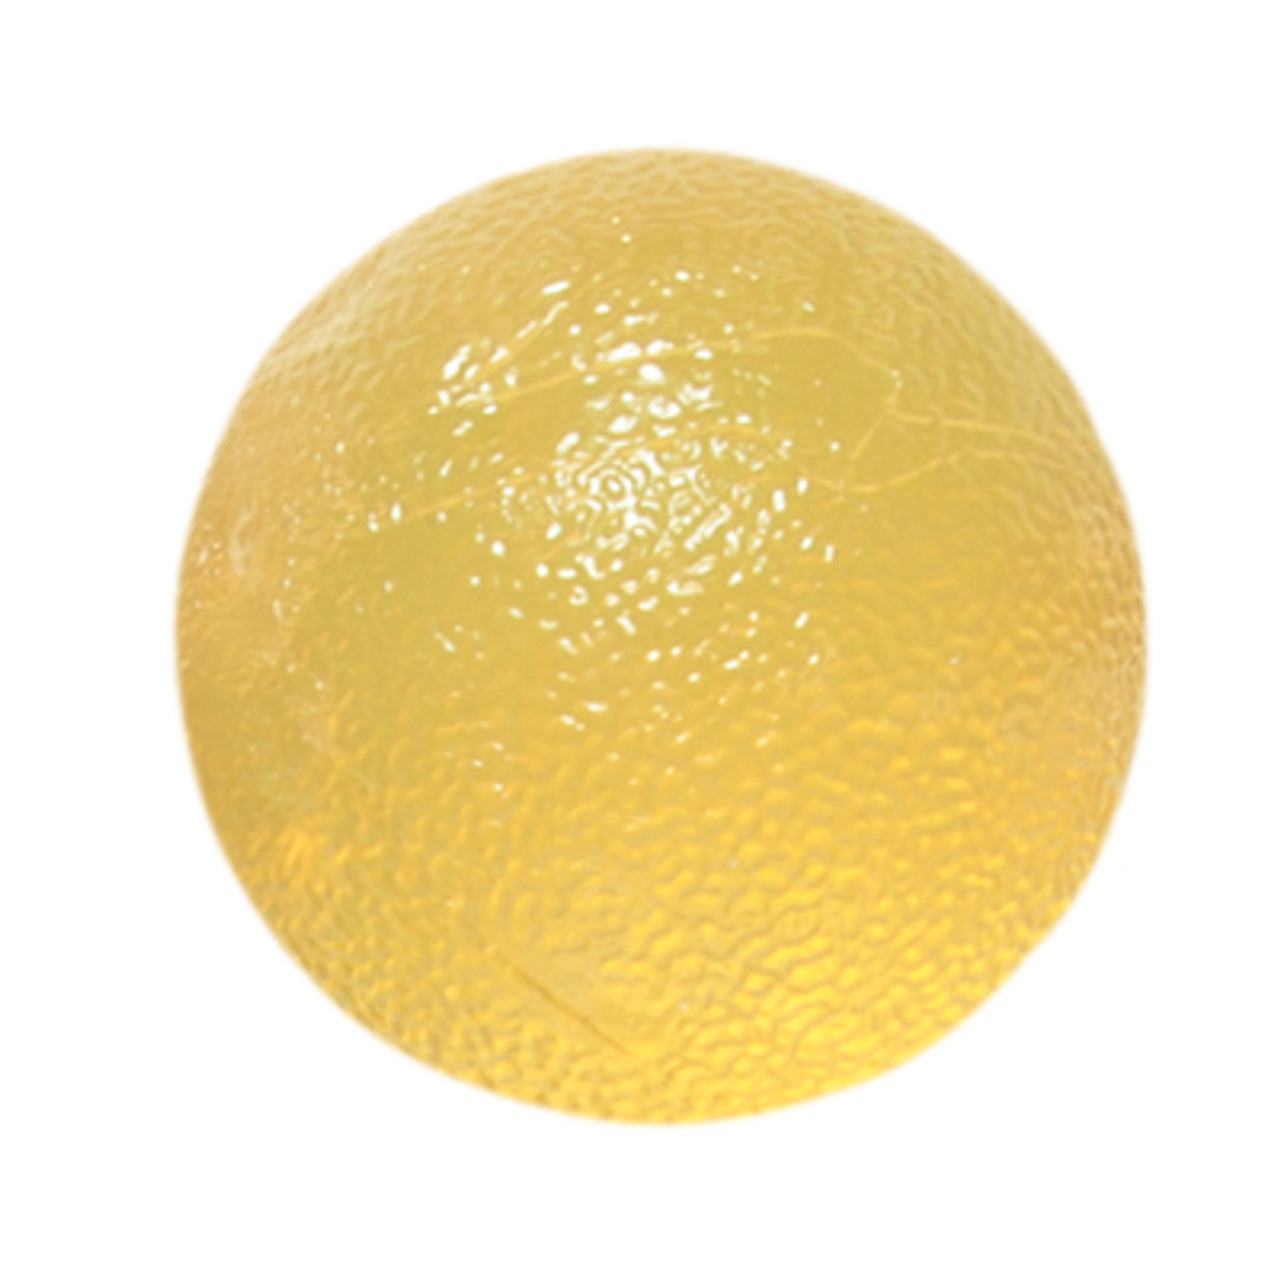 FAB 101491 CANDO GEL HAND EXERCISE BALL, YELLOW, EXTRA LIGHT STRENGHT (FAB 101491)